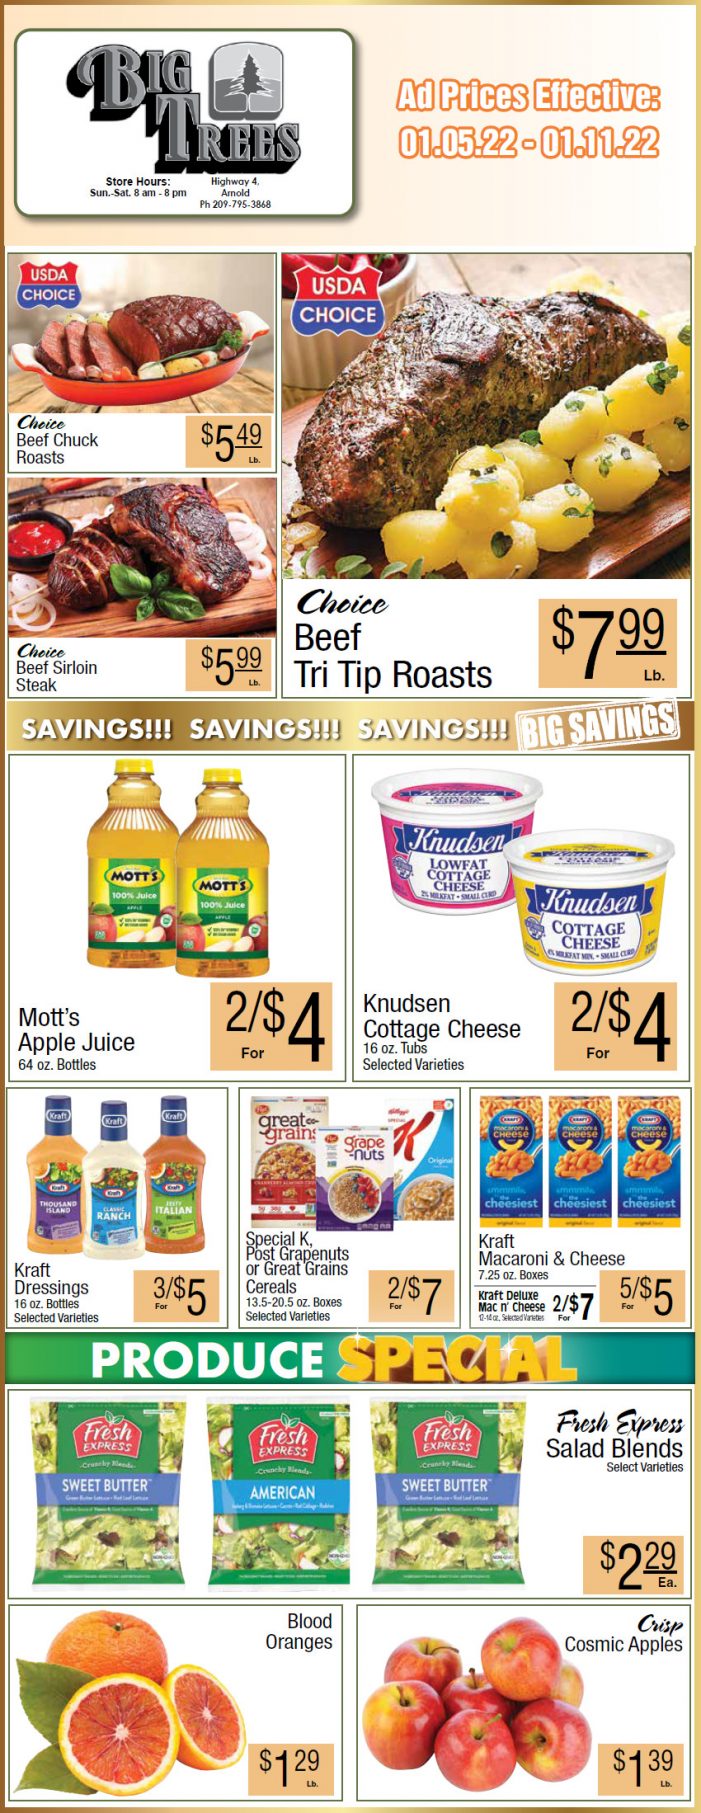 Big Trees Market Weekly Ad & Grocery Specials Through January 11th! Shop Local & Save!